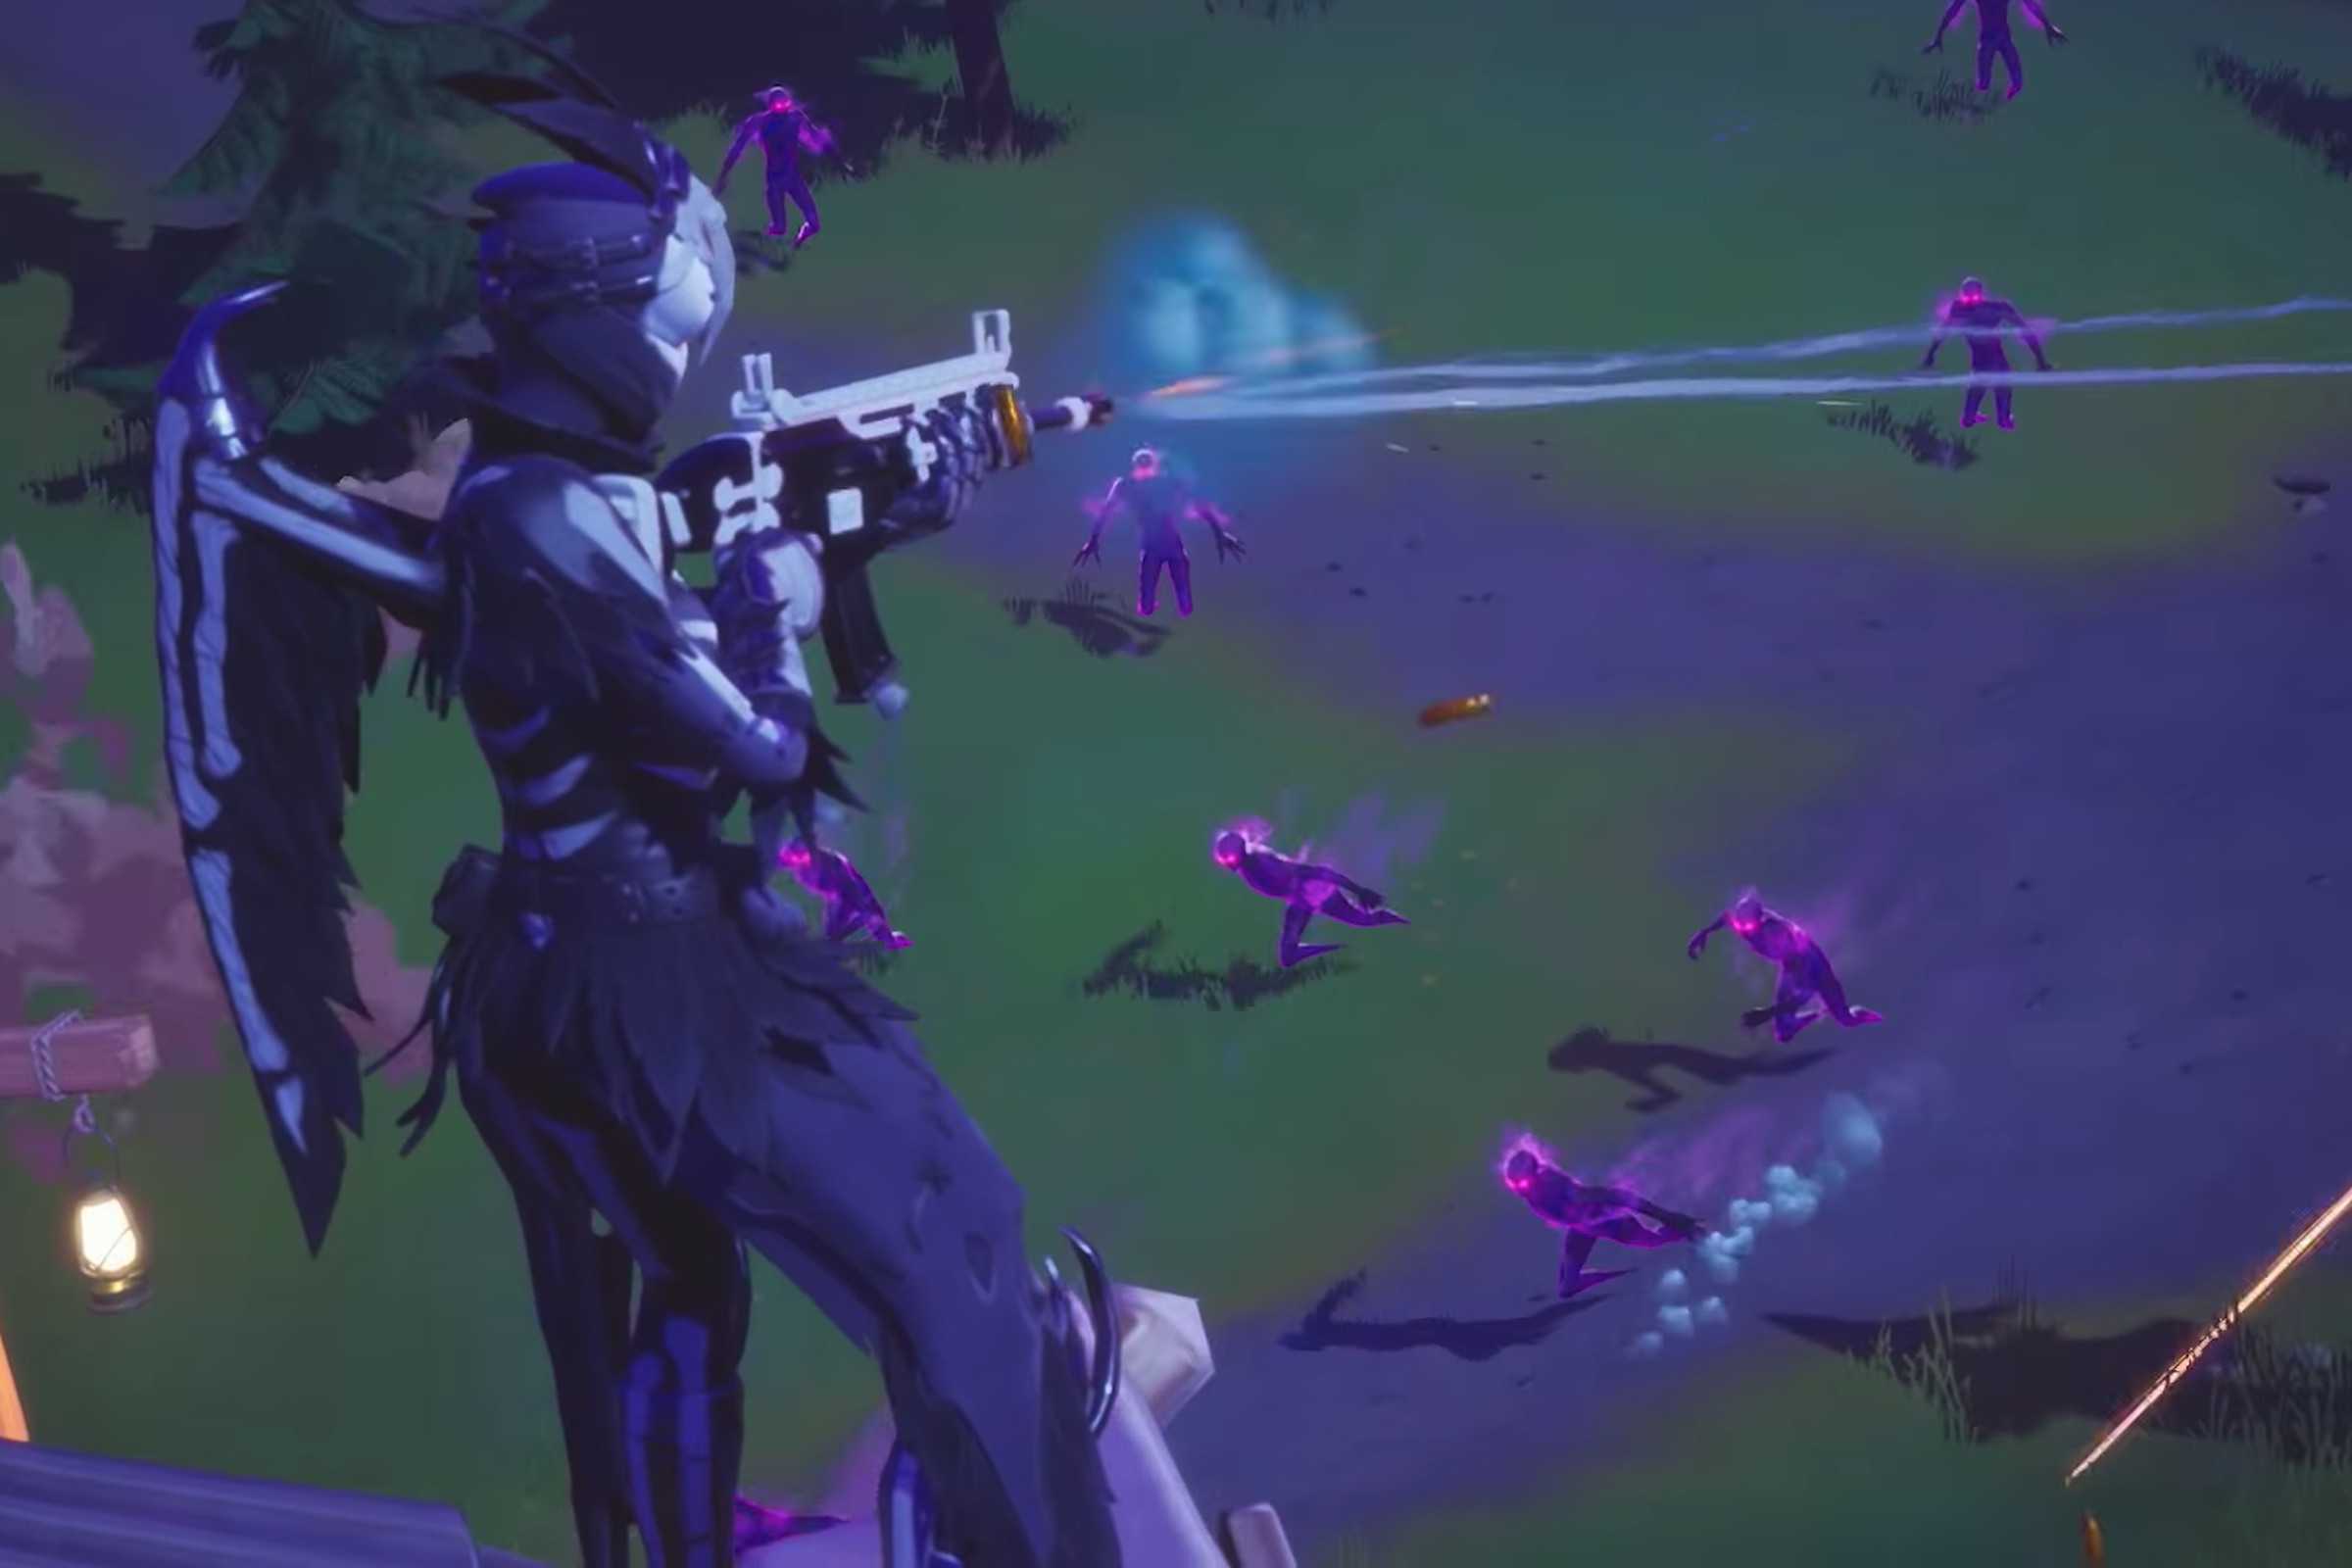 A Fortnite player fighting the new Fortnitemares ghosts.